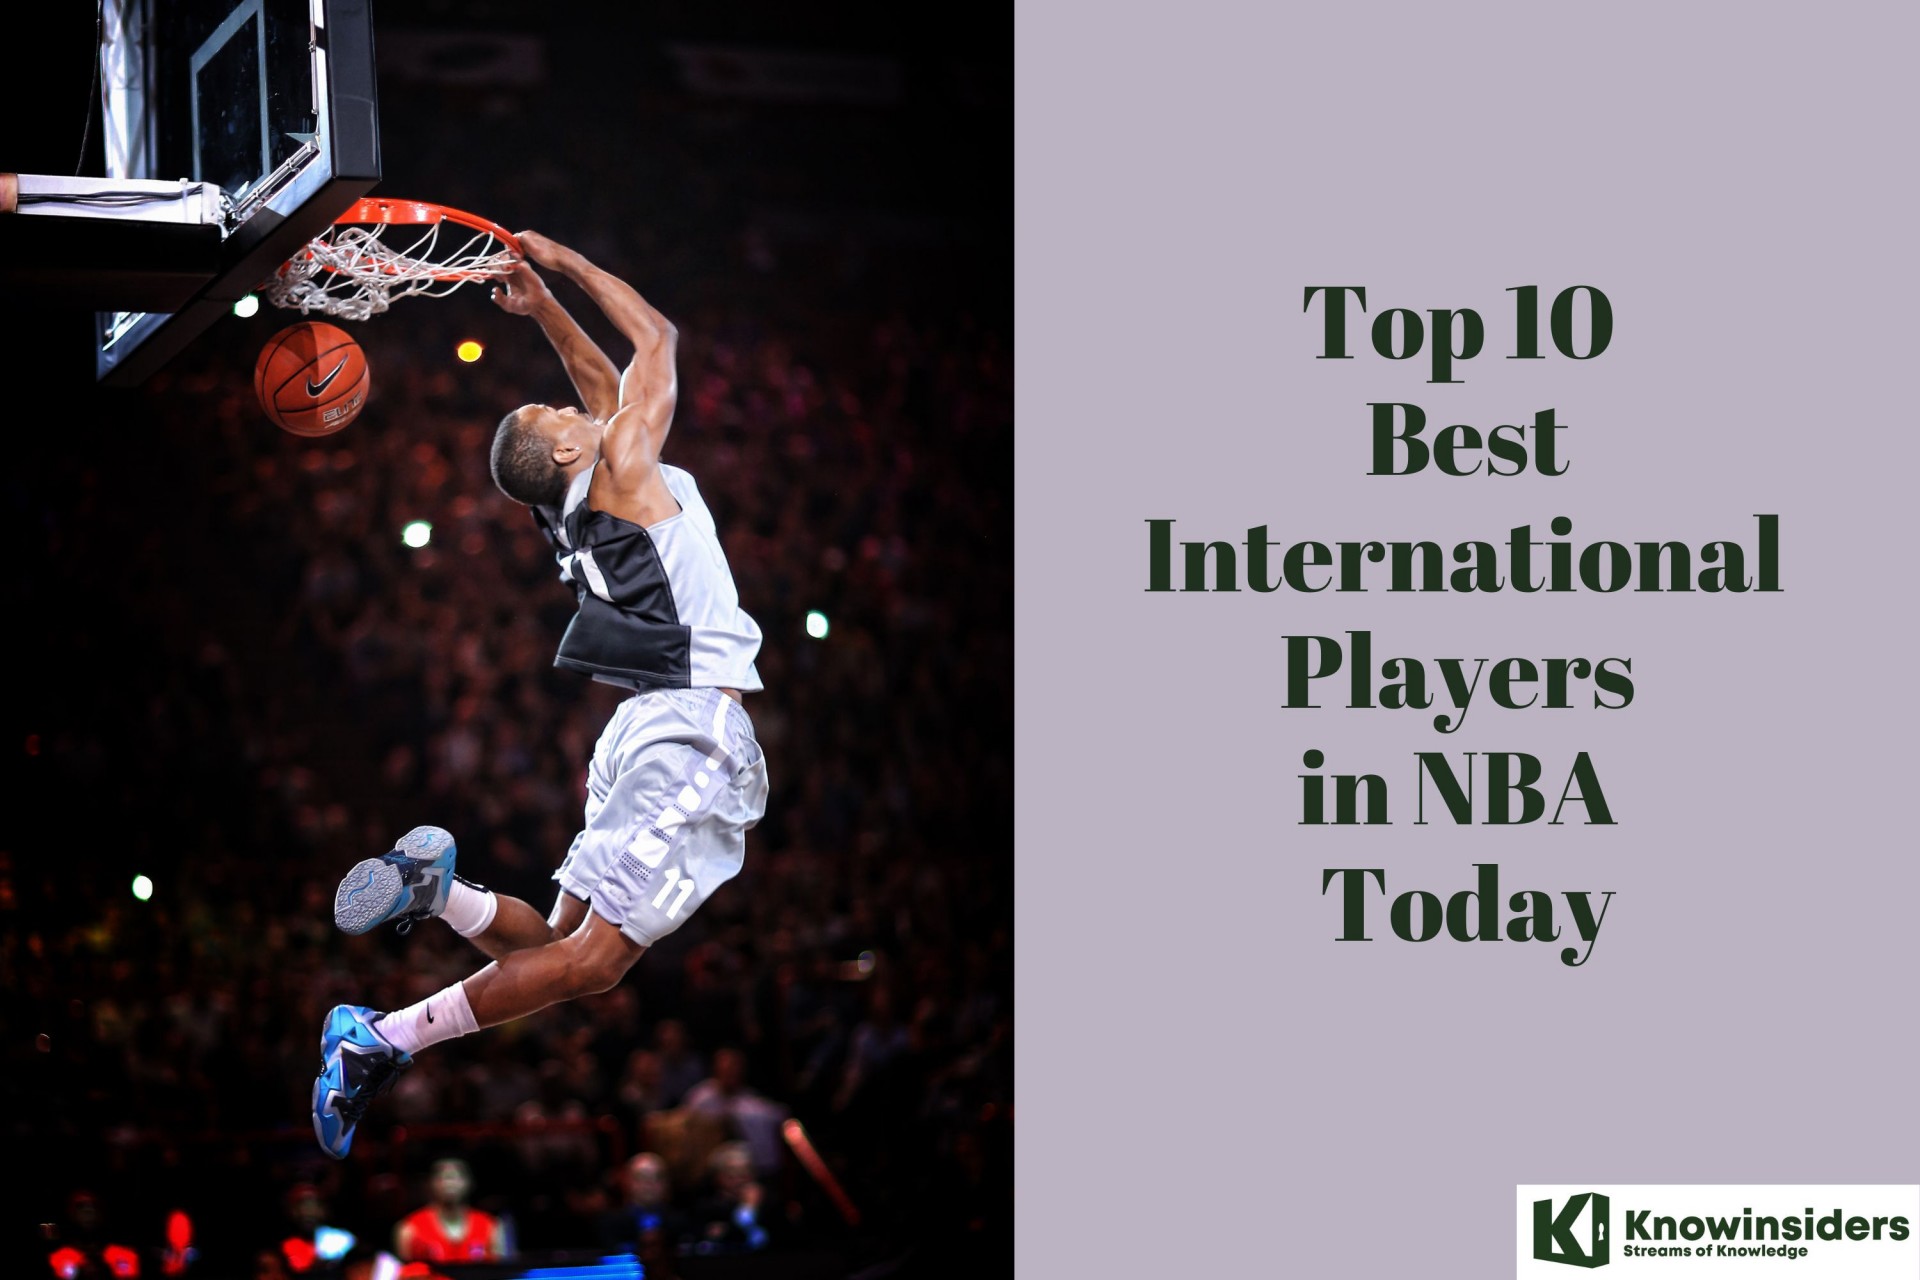 Top 10 Best International Players in NBA Today